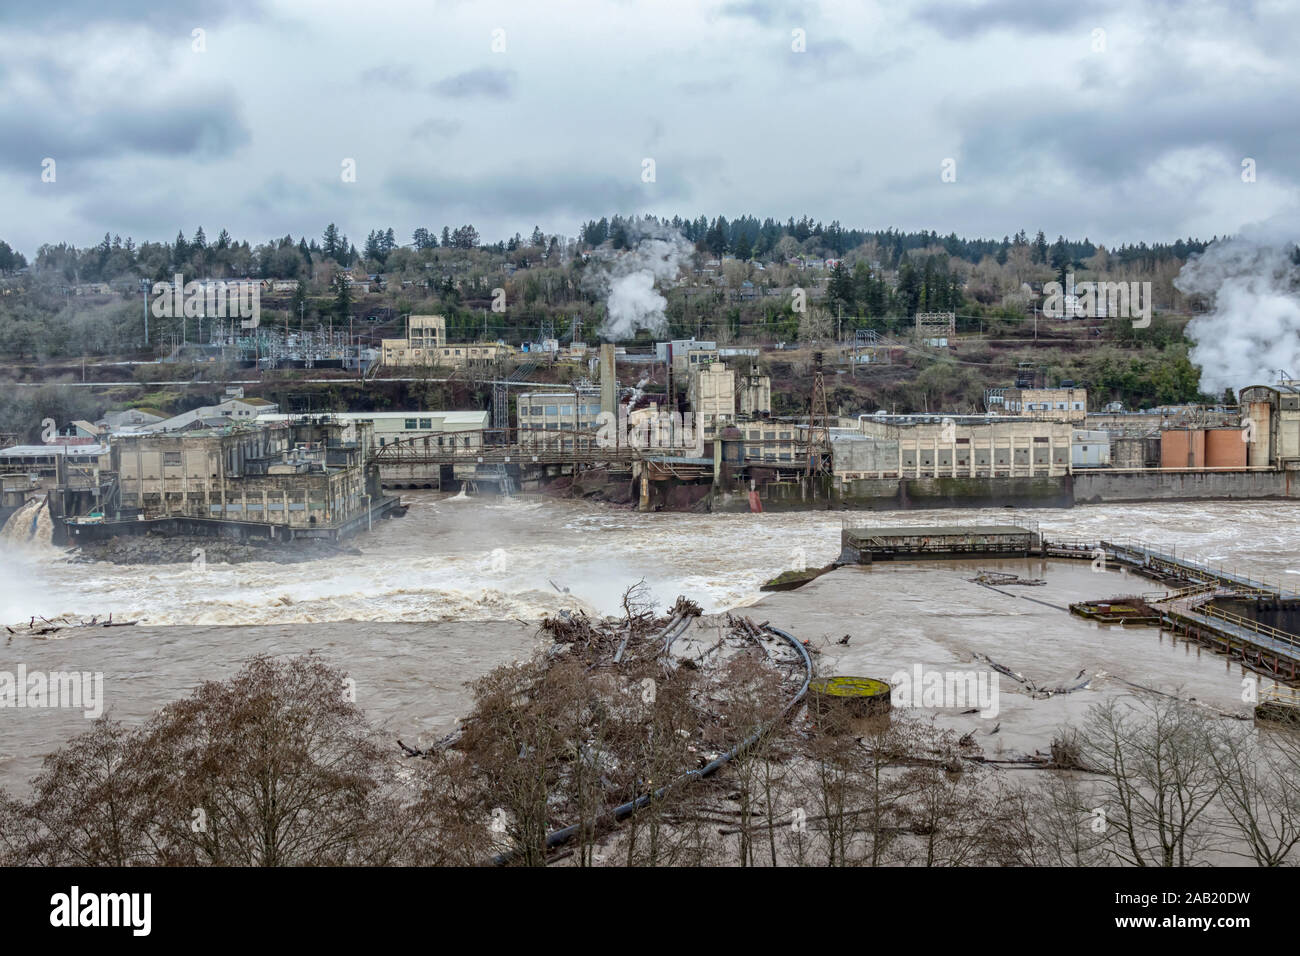 Flooding hydroelectric plant at Willamette Falls, Oregon City Stock Photo